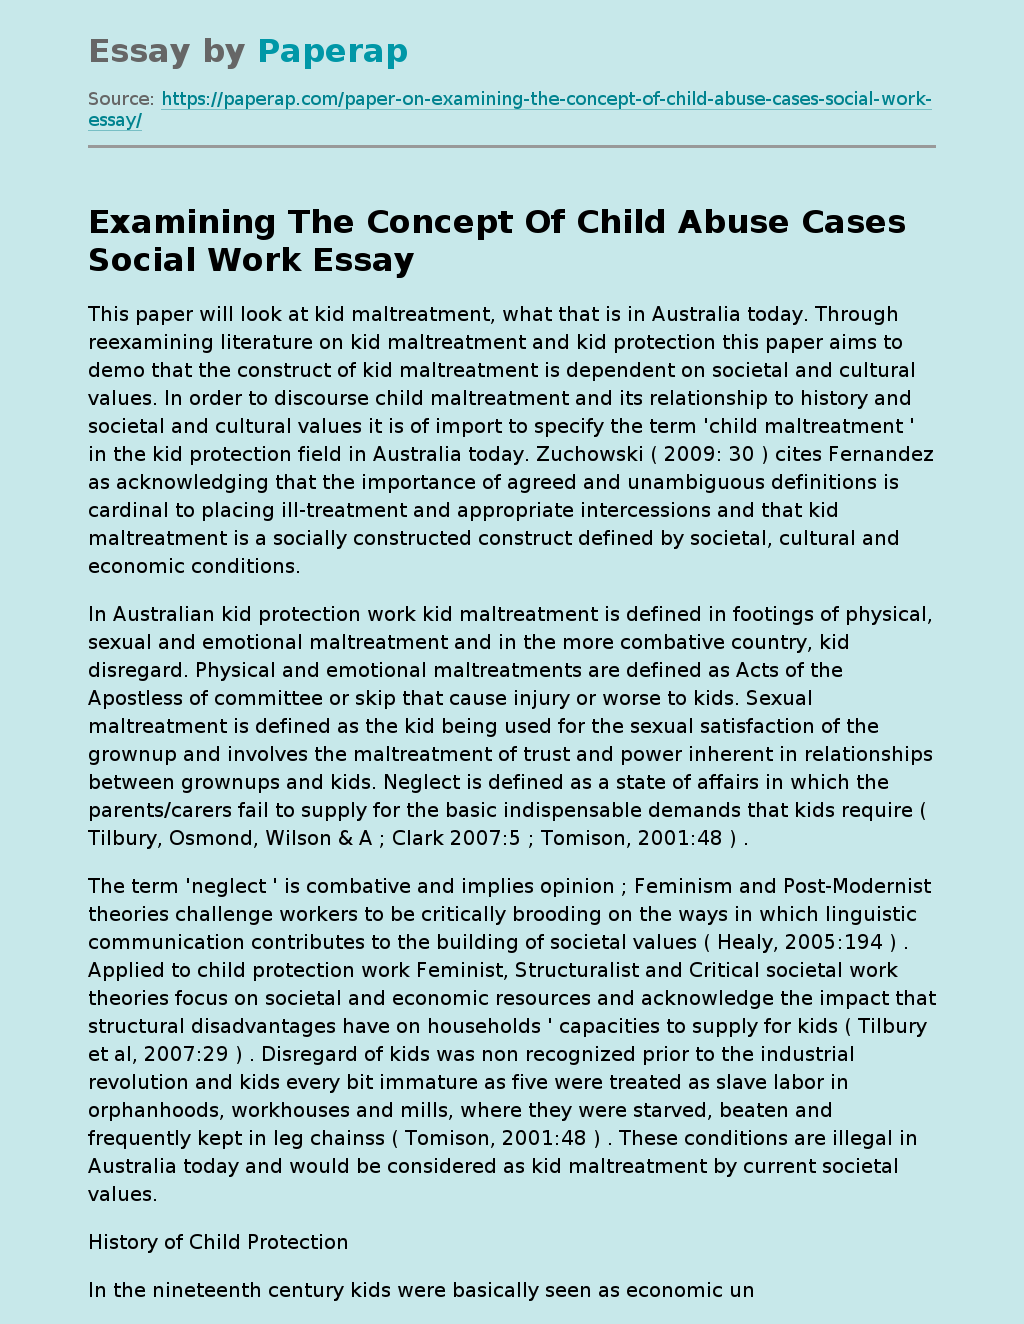 Examining The Concept Of Child Abuse Cases Social Work